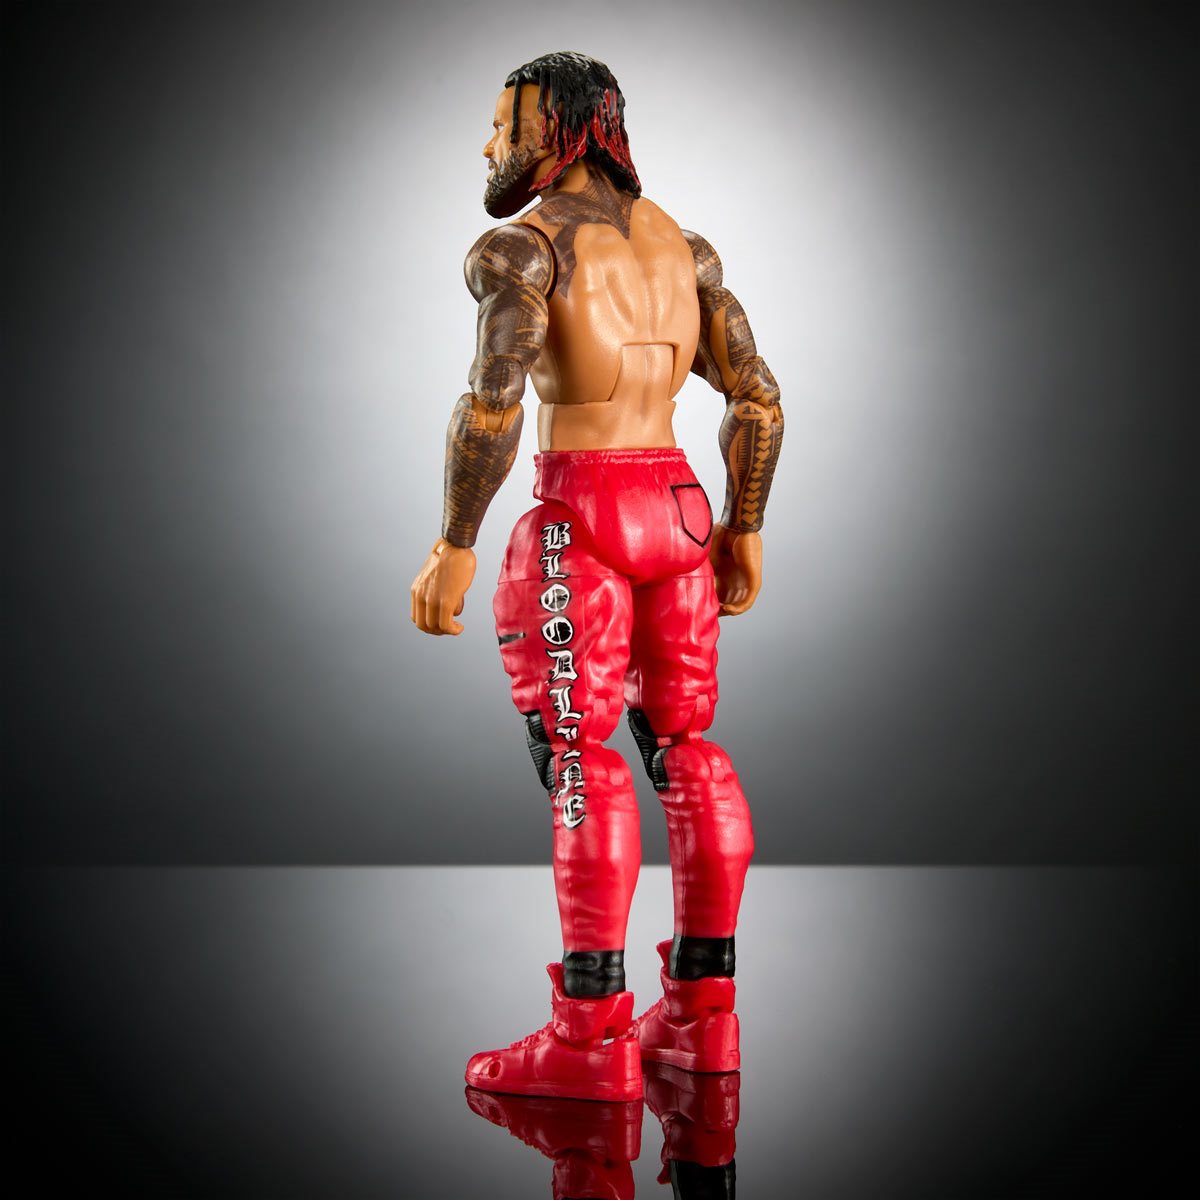 wwe jimmy uso and jey uso toys